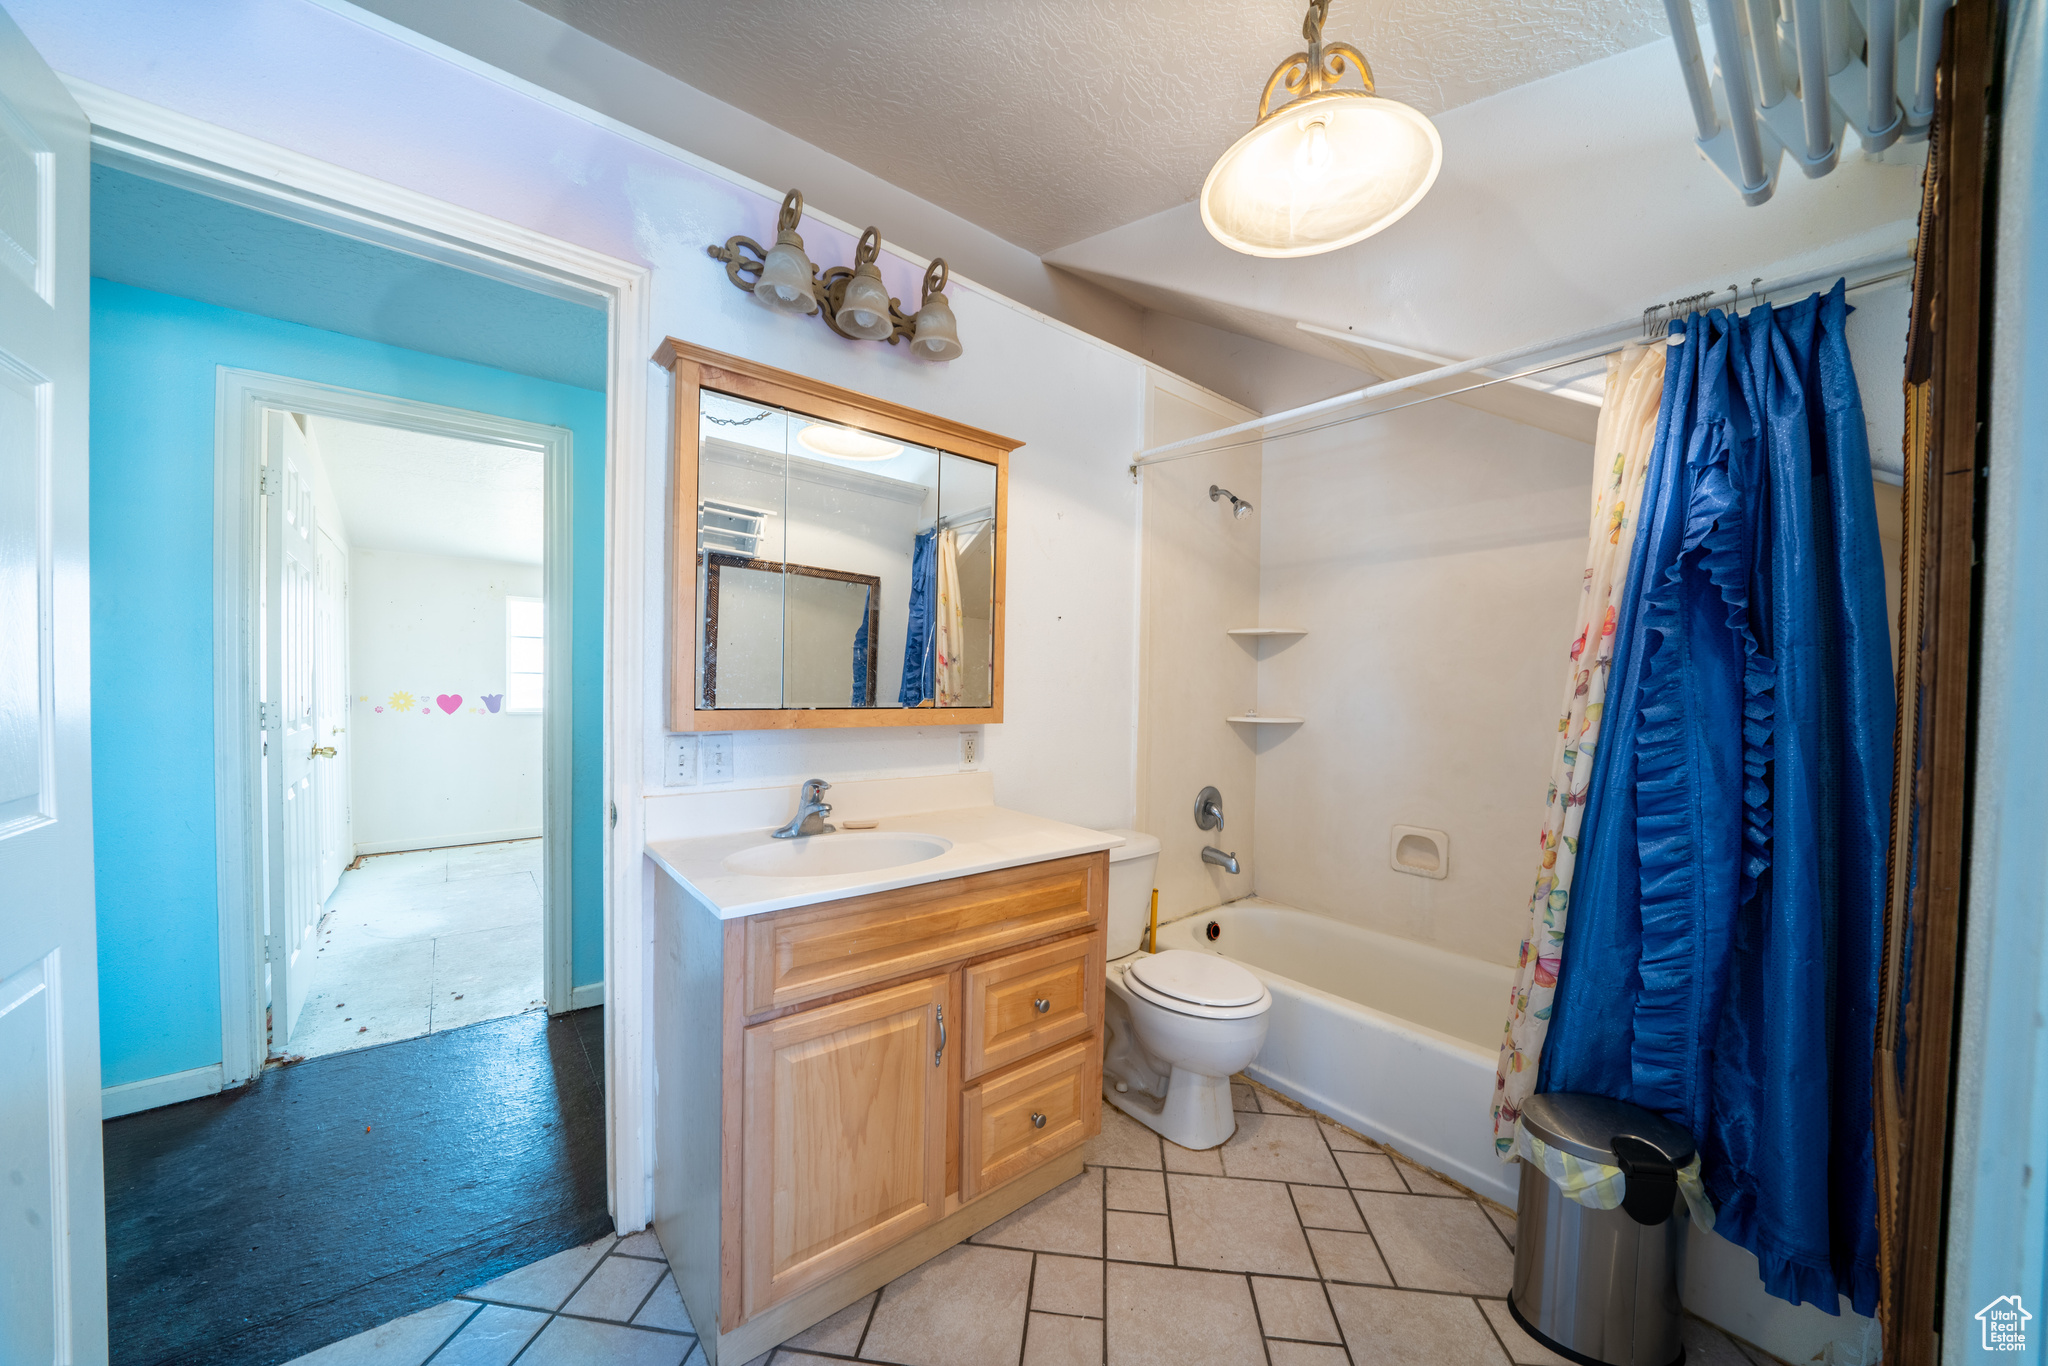 Full bathroom featuring tile floors, vanity with extensive cabinet space, toilet, a textured ceiling, and shower / tub combo with curtain